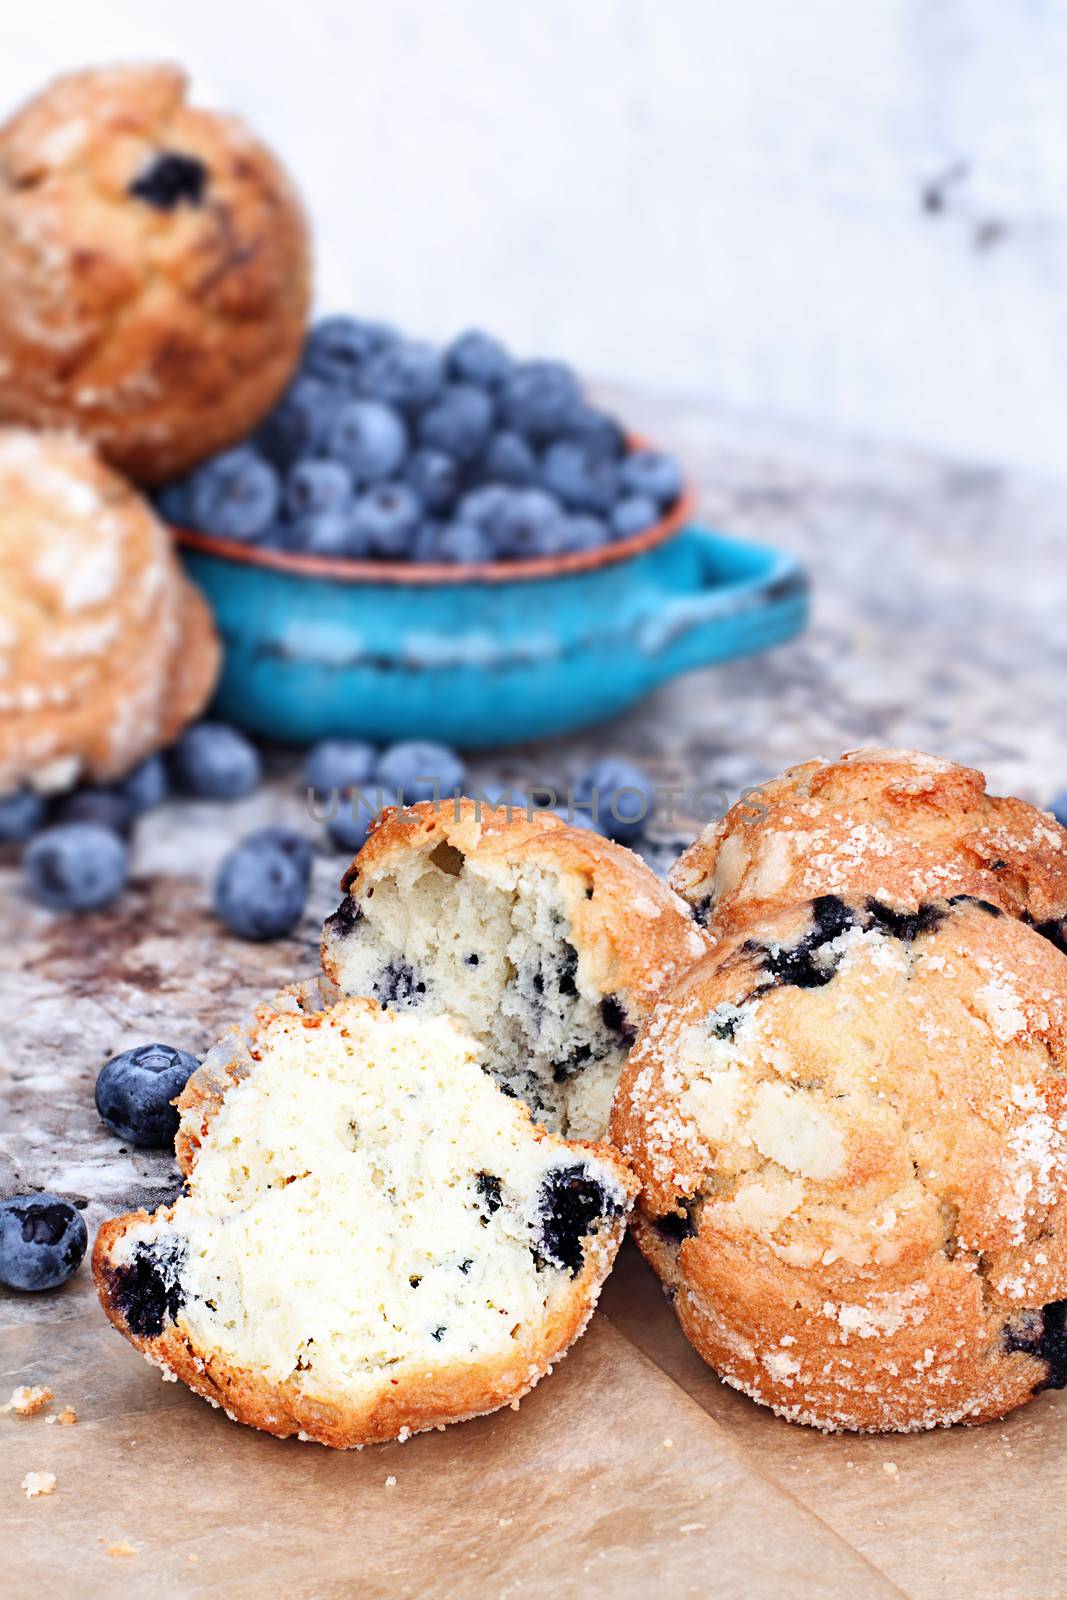 Delicious homemade blueberry muffins with fresh blueberries in the background.